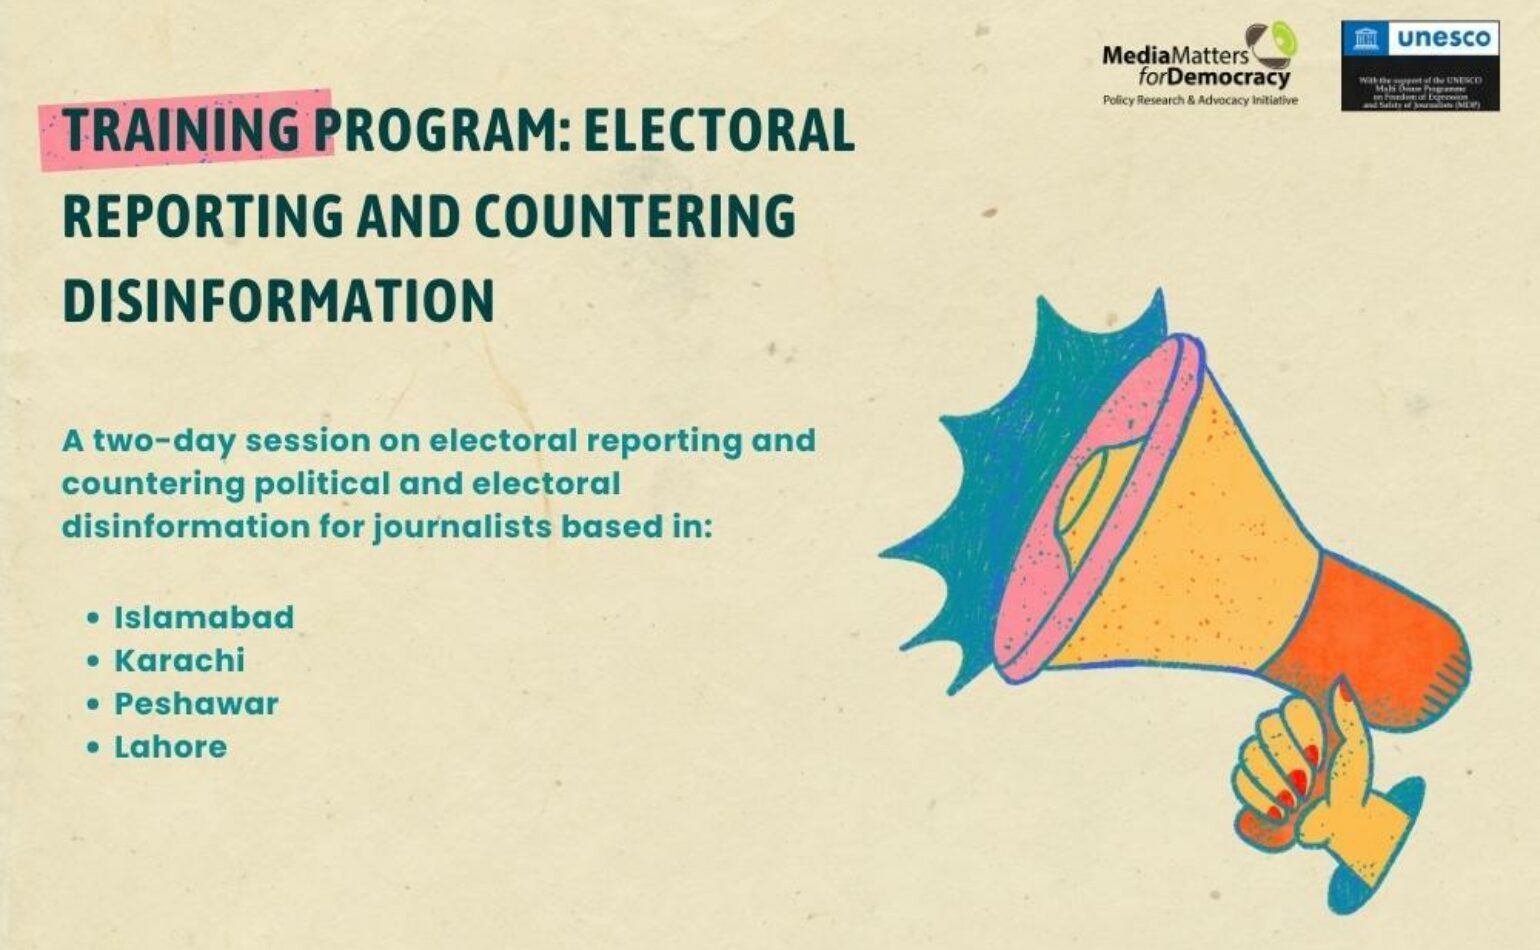 MMfD announces workshop on Election Reporting and Countering Disinformation